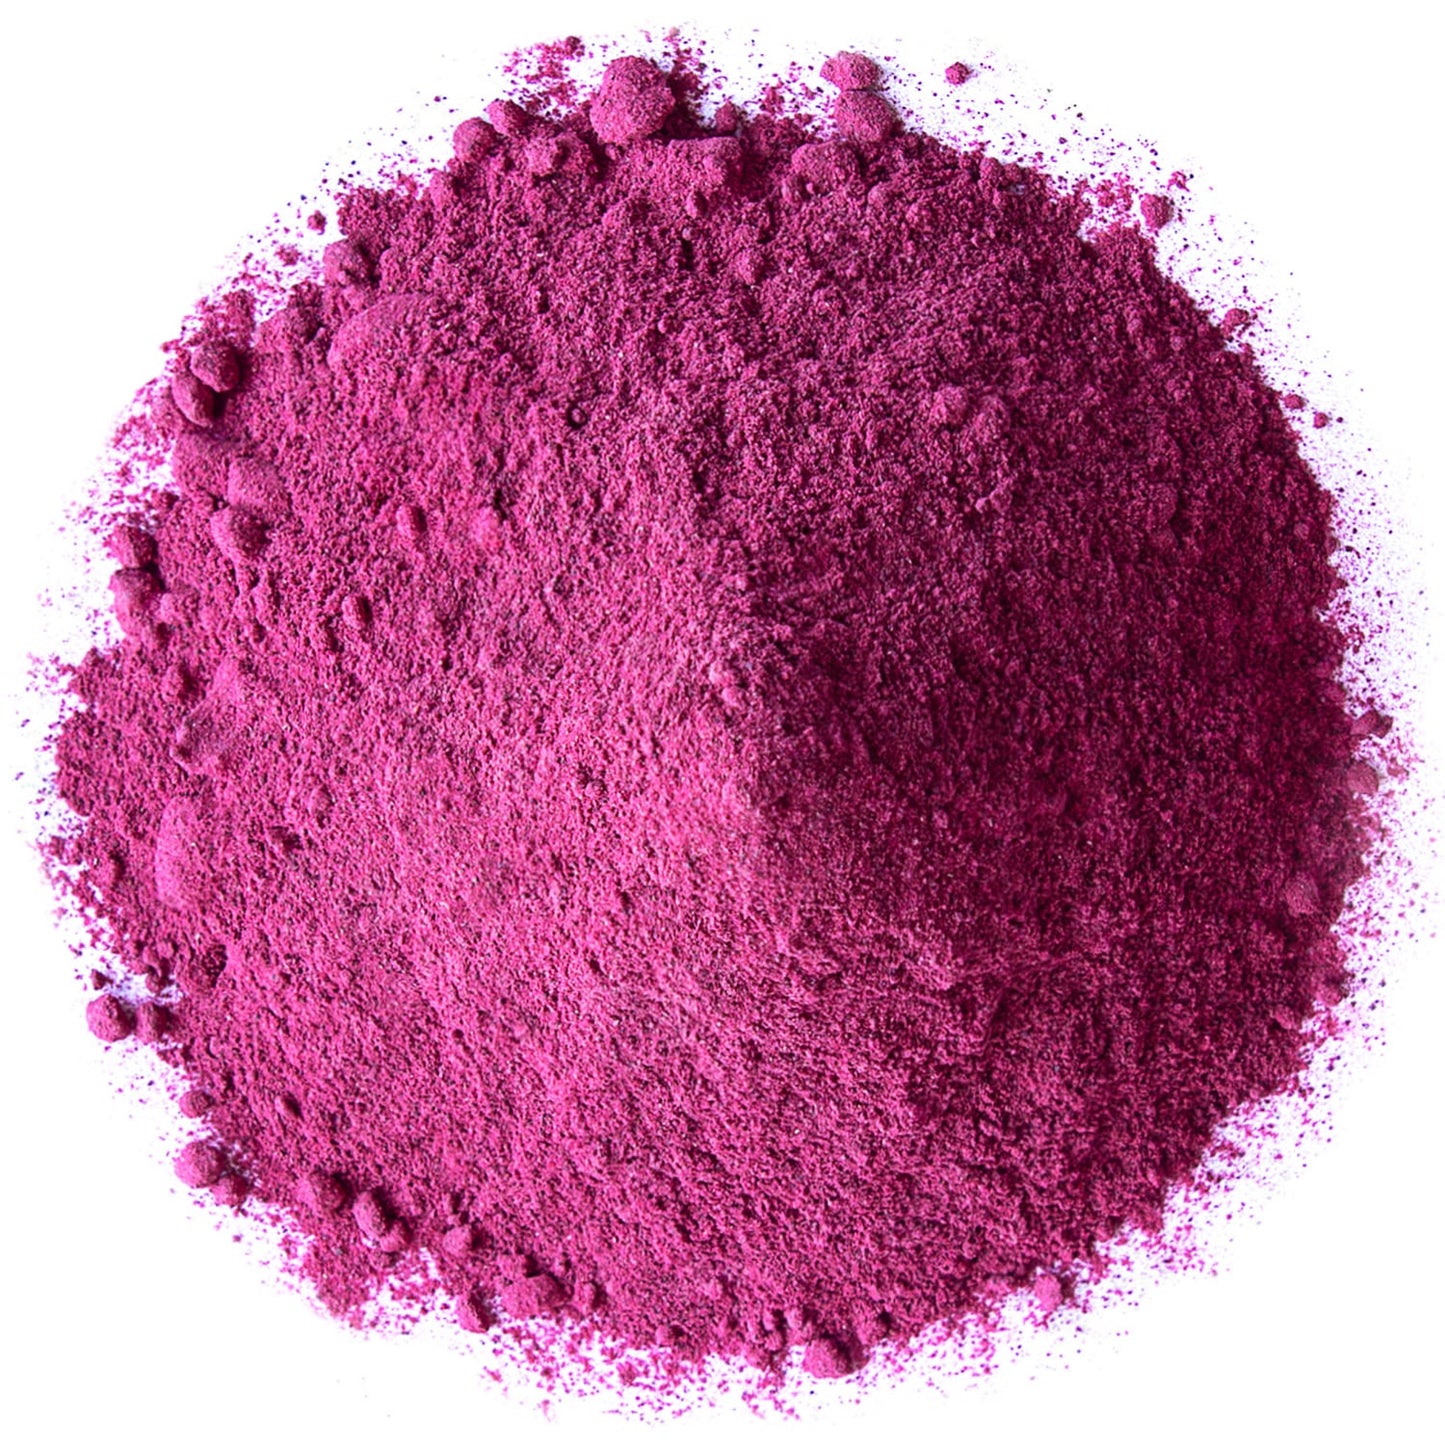 Organic Red Dragon Fruit Powder — Non-GMO, Freeze-Dried Pitaya, Raw Pitahaya, Vegan, Non-Irradiated, Great for Drinks - by Food to Live